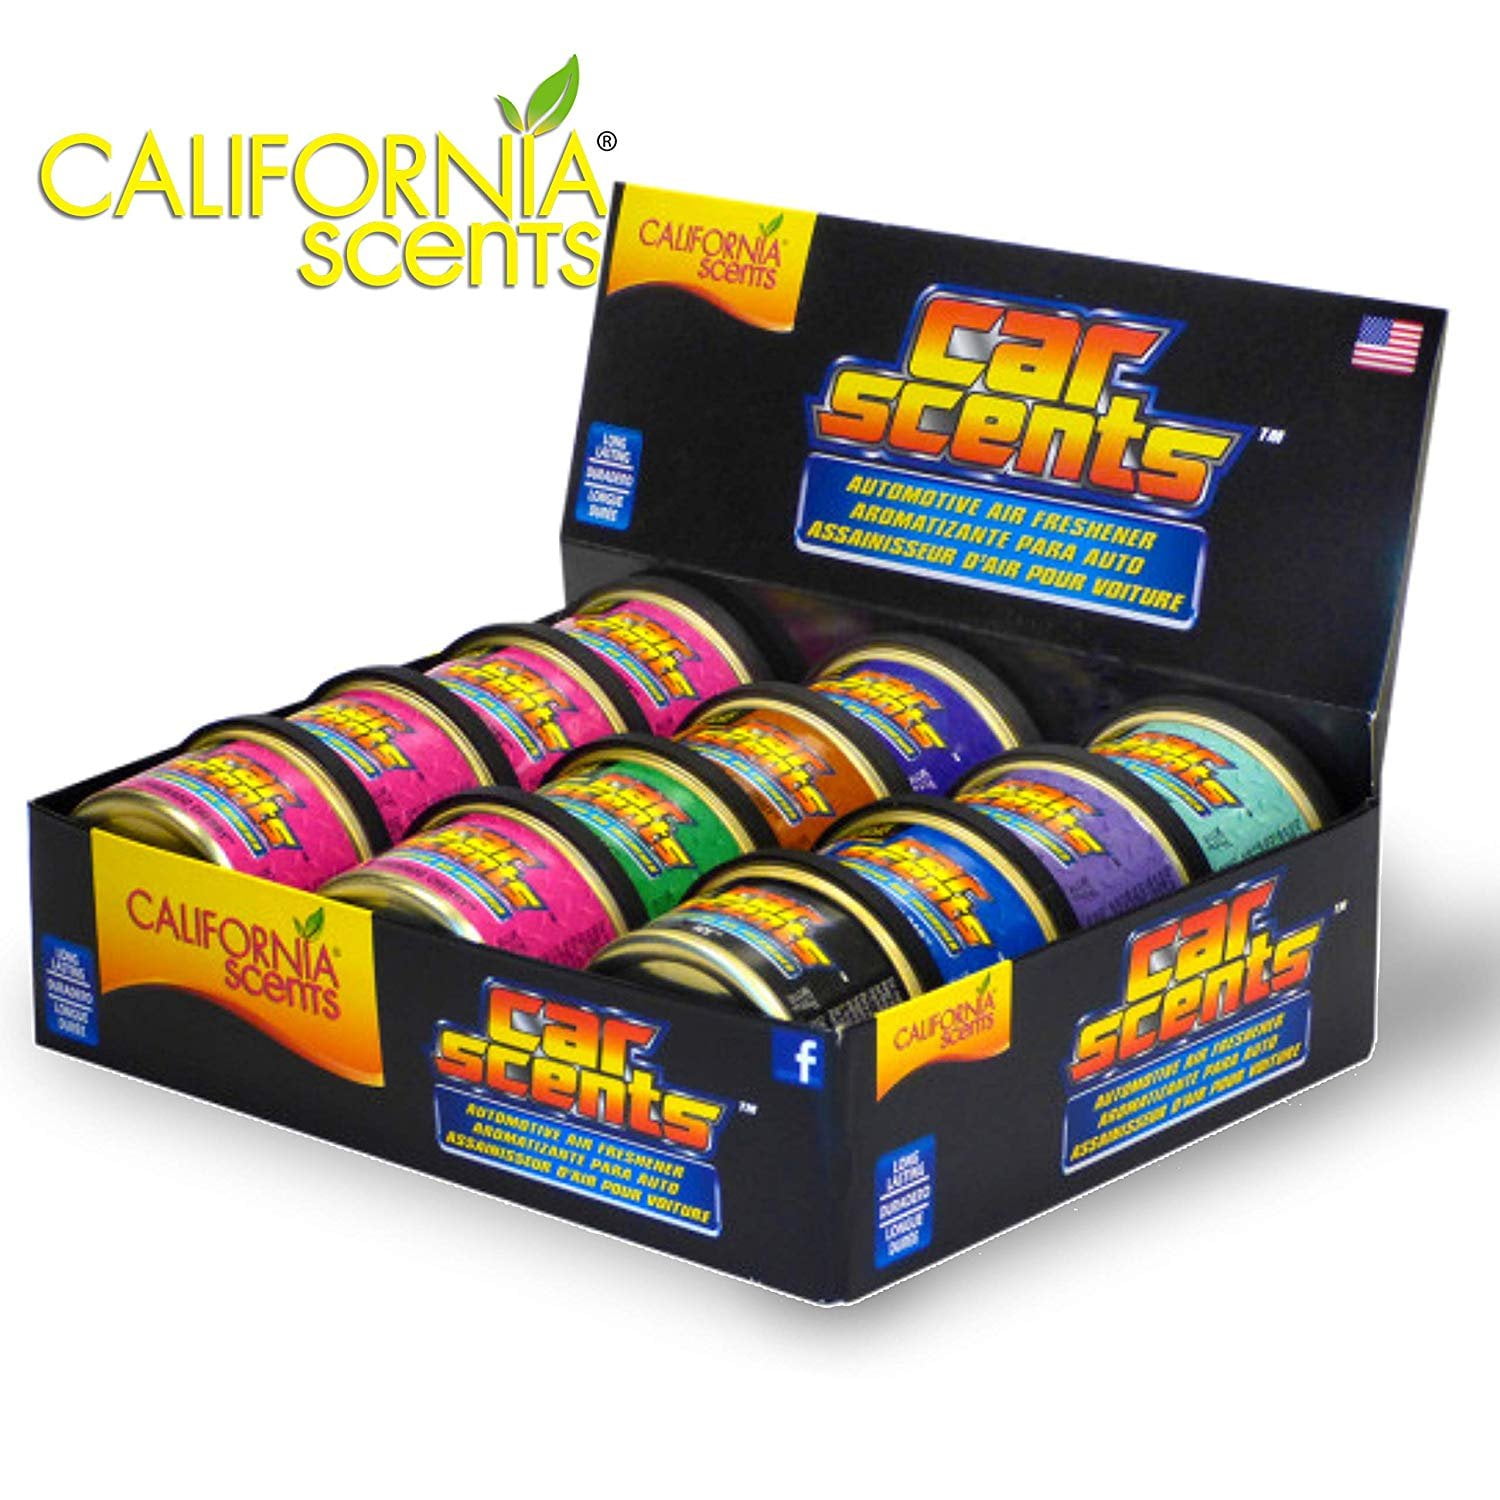 California Scents California Car Scents, Car Air Freshener & Fragrance,  Long-Lasting Fresh Scents, 1.5 oz. Cans 12 Count 